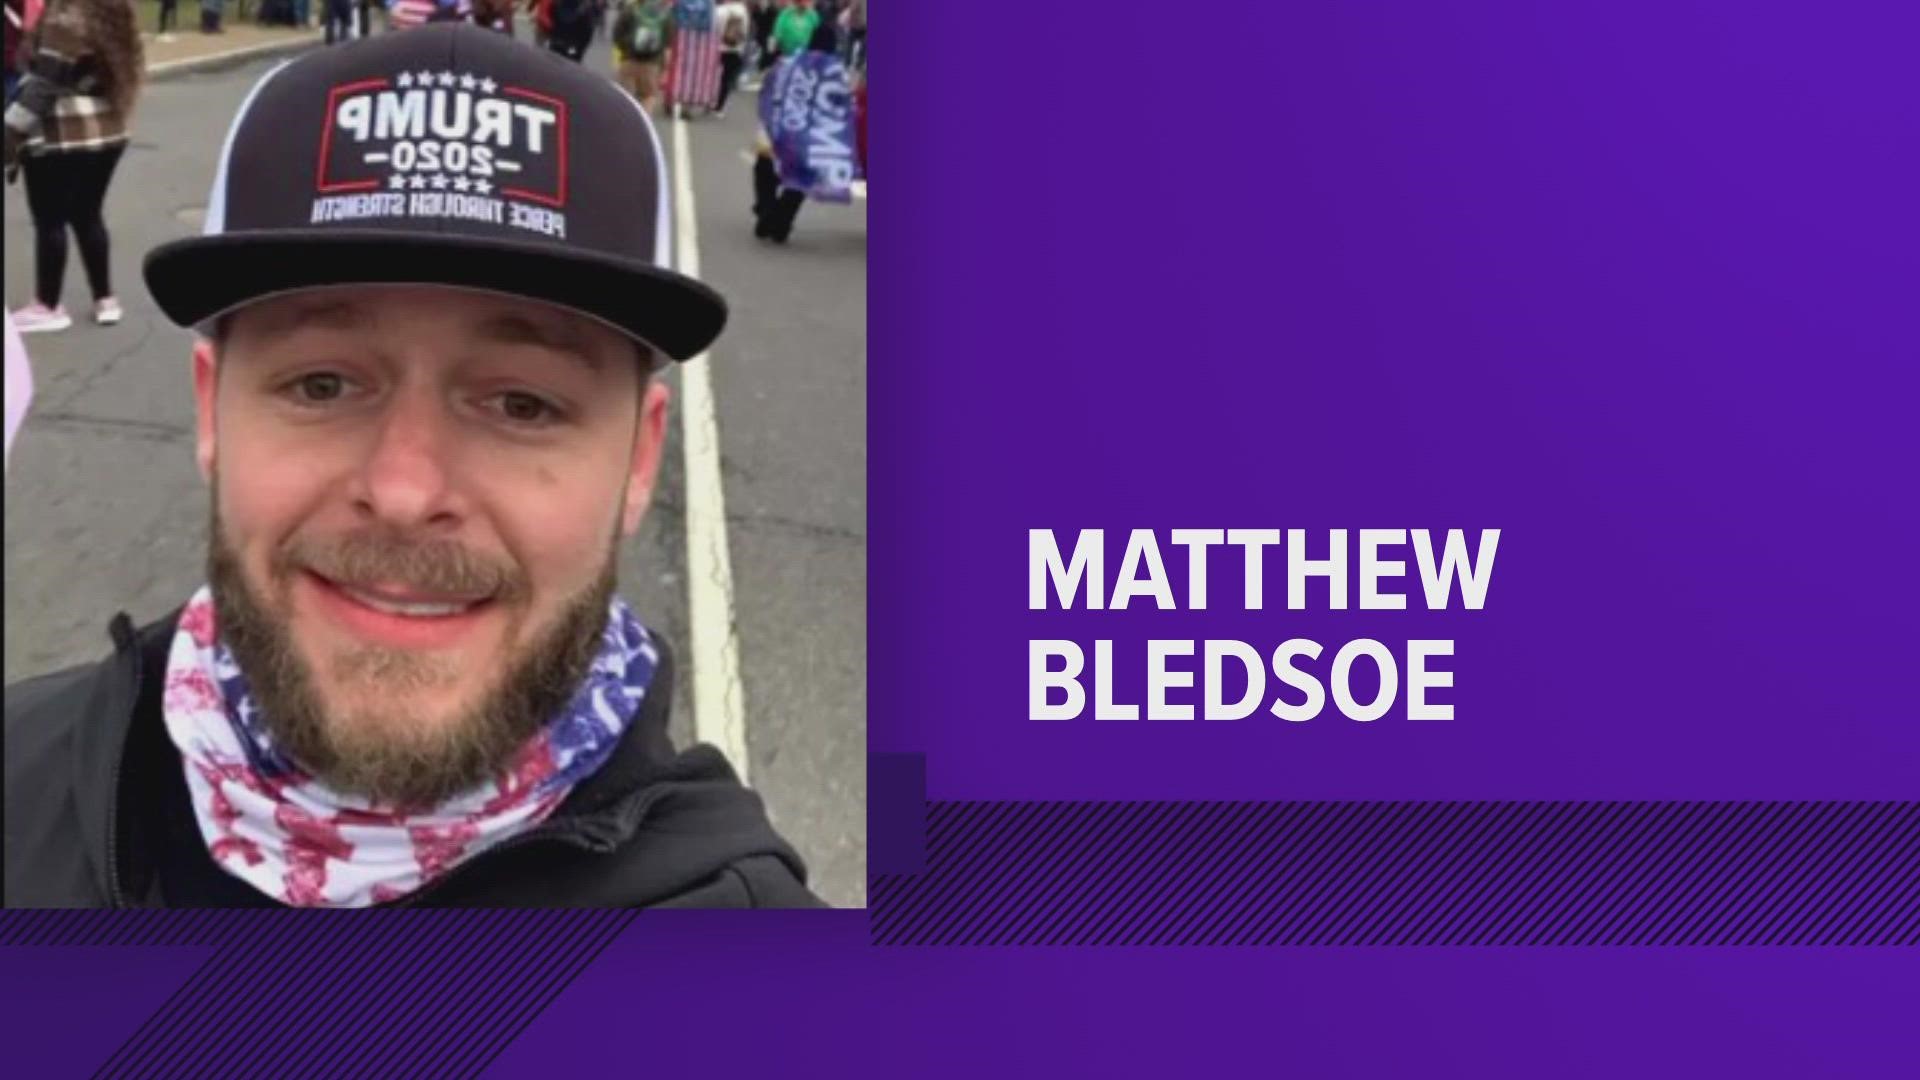 Matthew Bledsoe was convicted of felony obstruction of an official proceeding and four other misdemeanor charges in the breach.